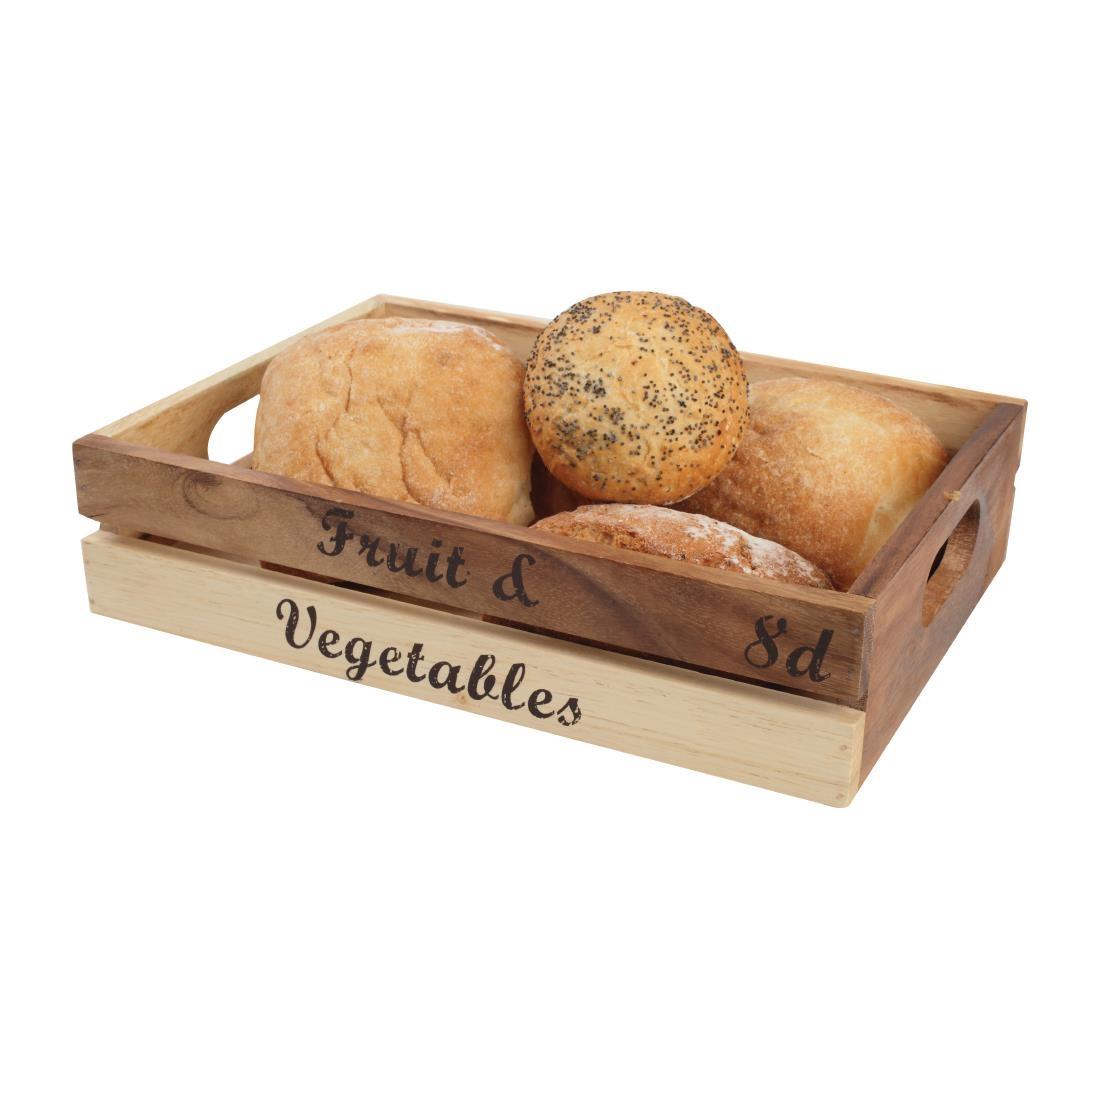 T&G Rustic Wooden Fruit and Veg Crate - GL066  - 3